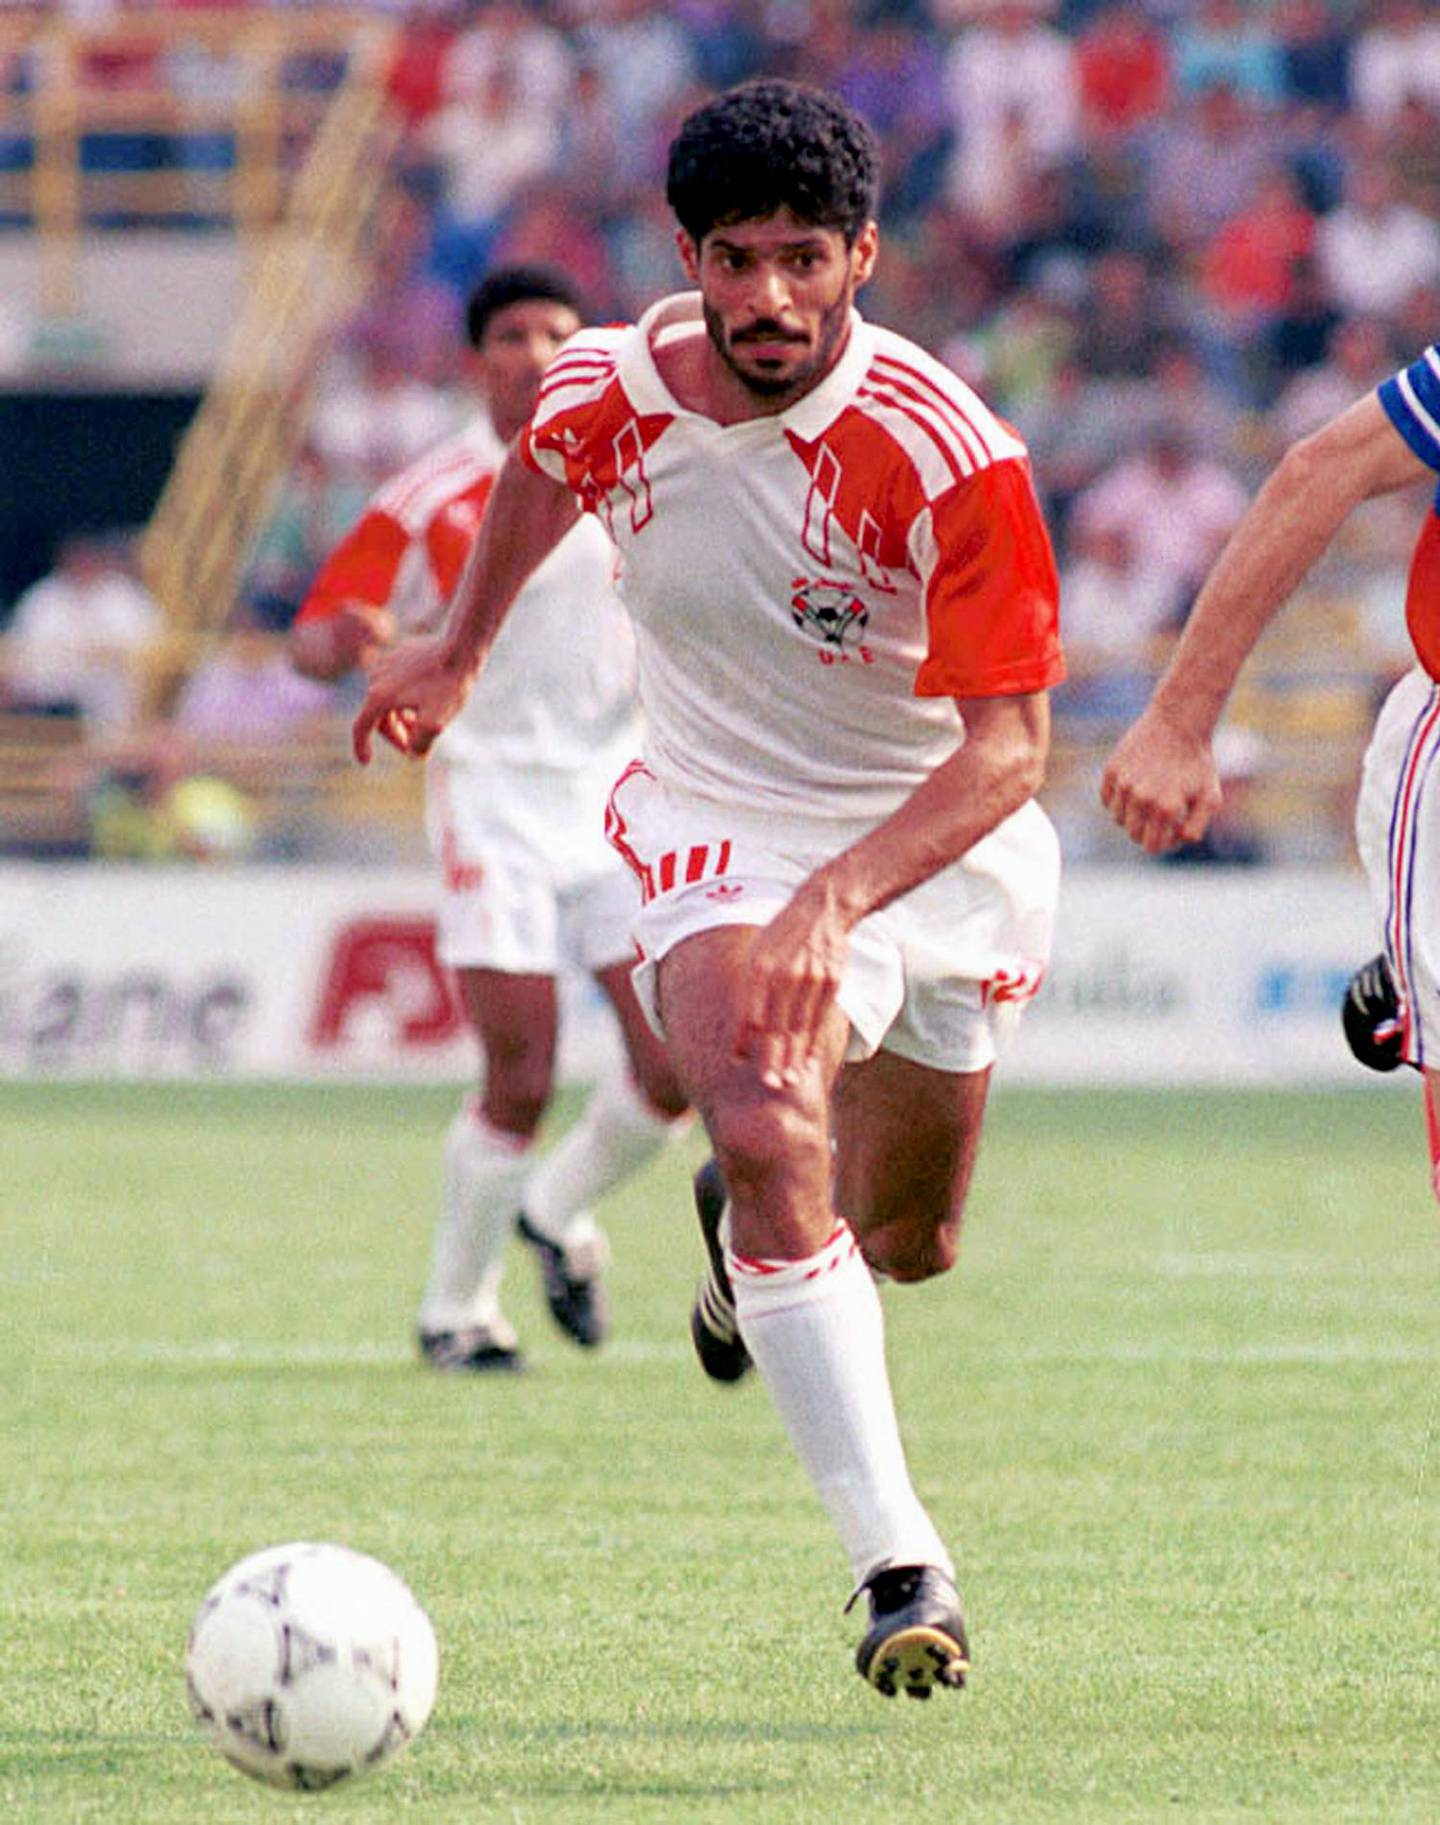 UAE forward Adnan al-Talyani on the ball during the World Cup Group D match against Yugoslavia at the Renato Dall'Ara stadium in Bologna, Italy on June 19, 1990. AFP